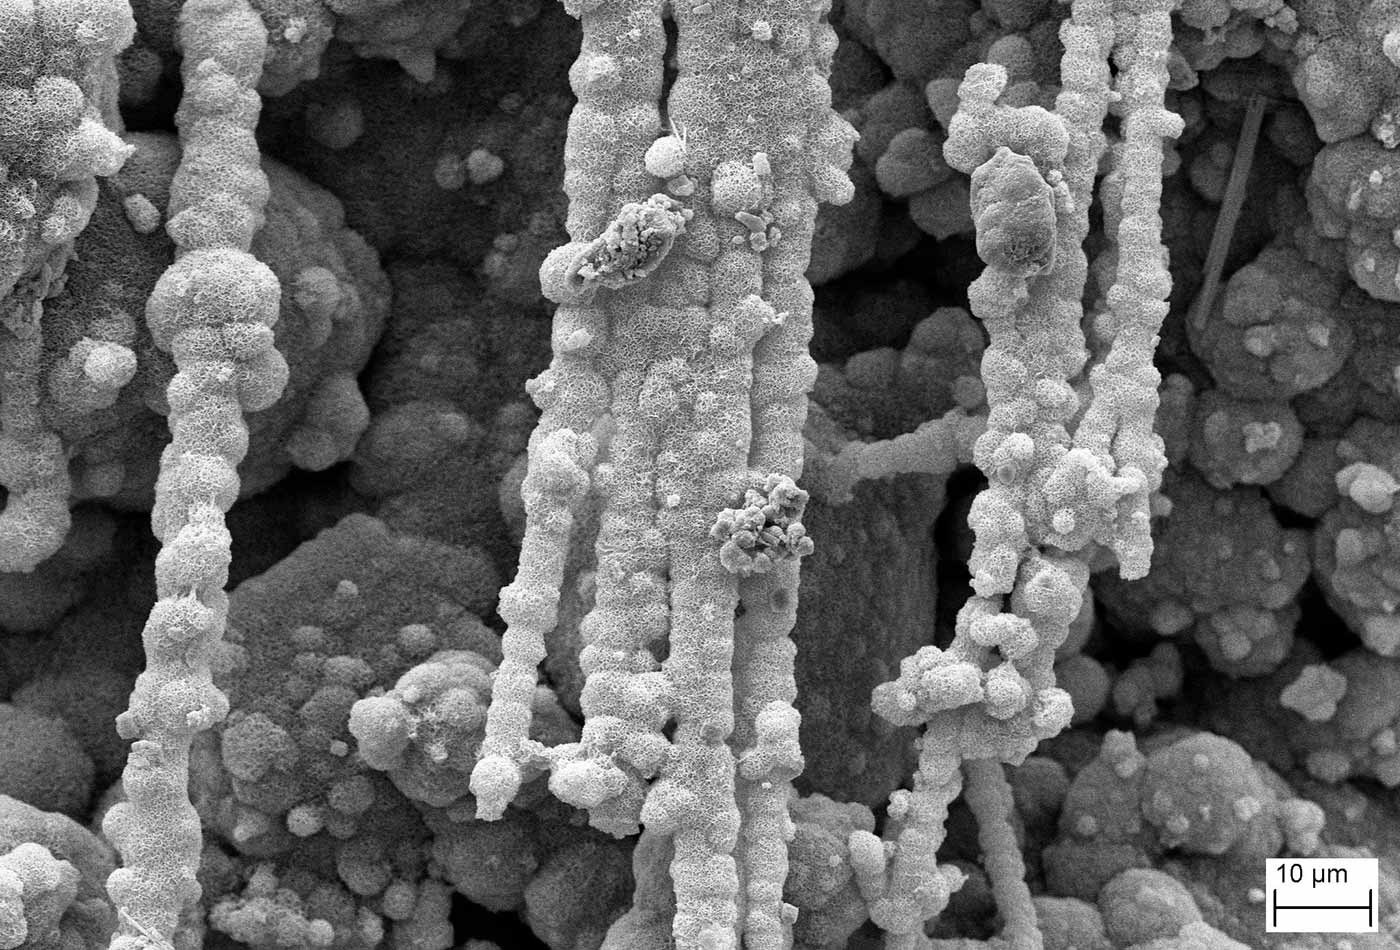 This SEM image shows formation of a crack bridging for self-healing in concrete.